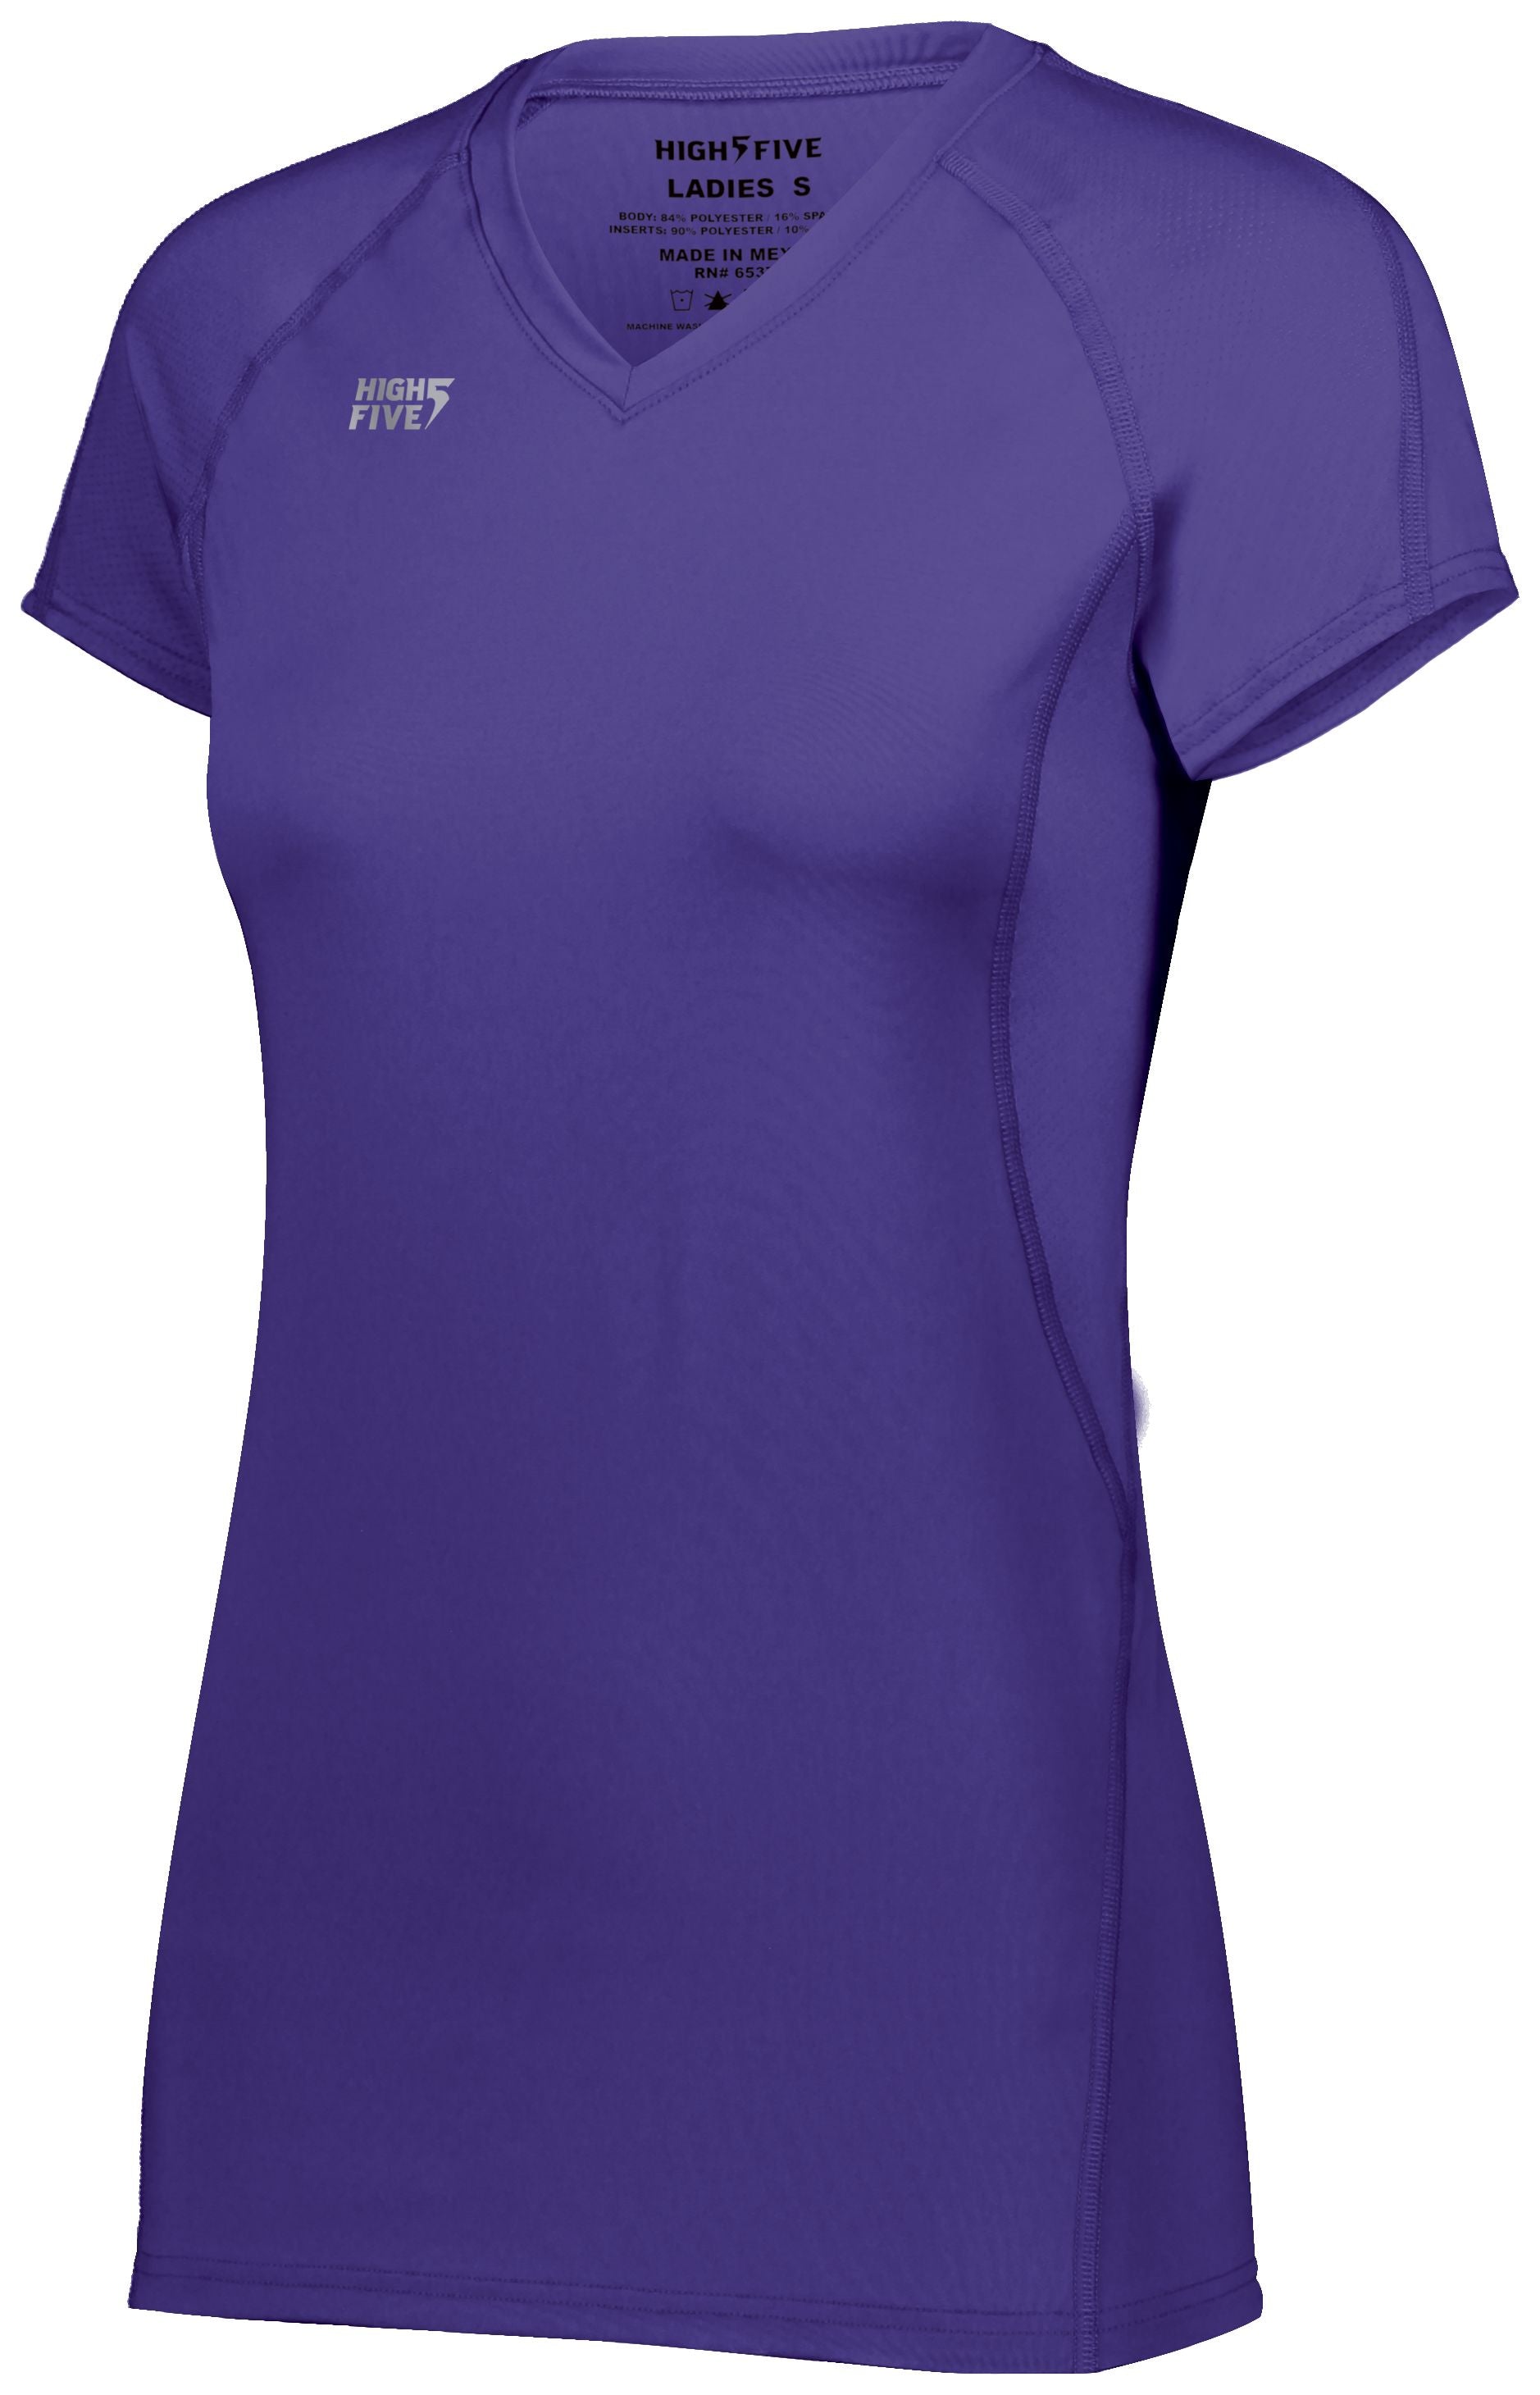 High 5 Girls Truhit Short Sleeve Jersey in Purple (Hlw)  -Part of the Girls, High5-Products, Volleyball, Girls-Jersey, Shirts product lines at KanaleyCreations.com